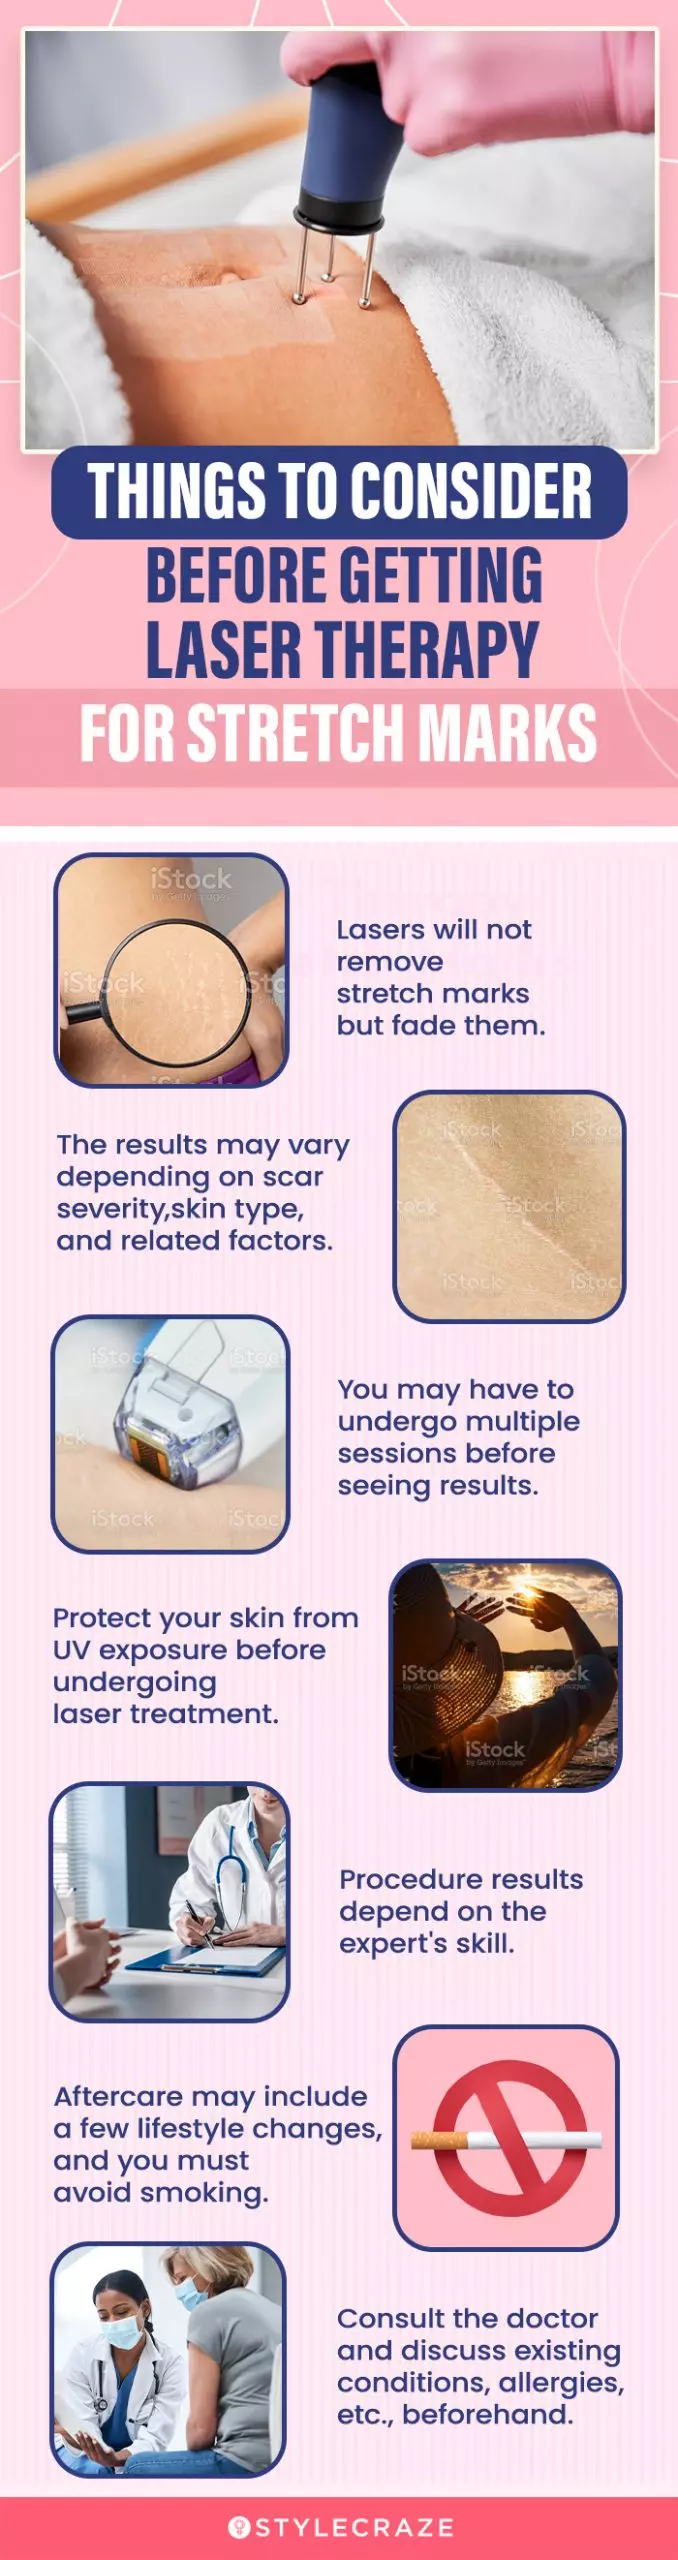 things to consider before getting laser therapy for stretch marks (infographic)